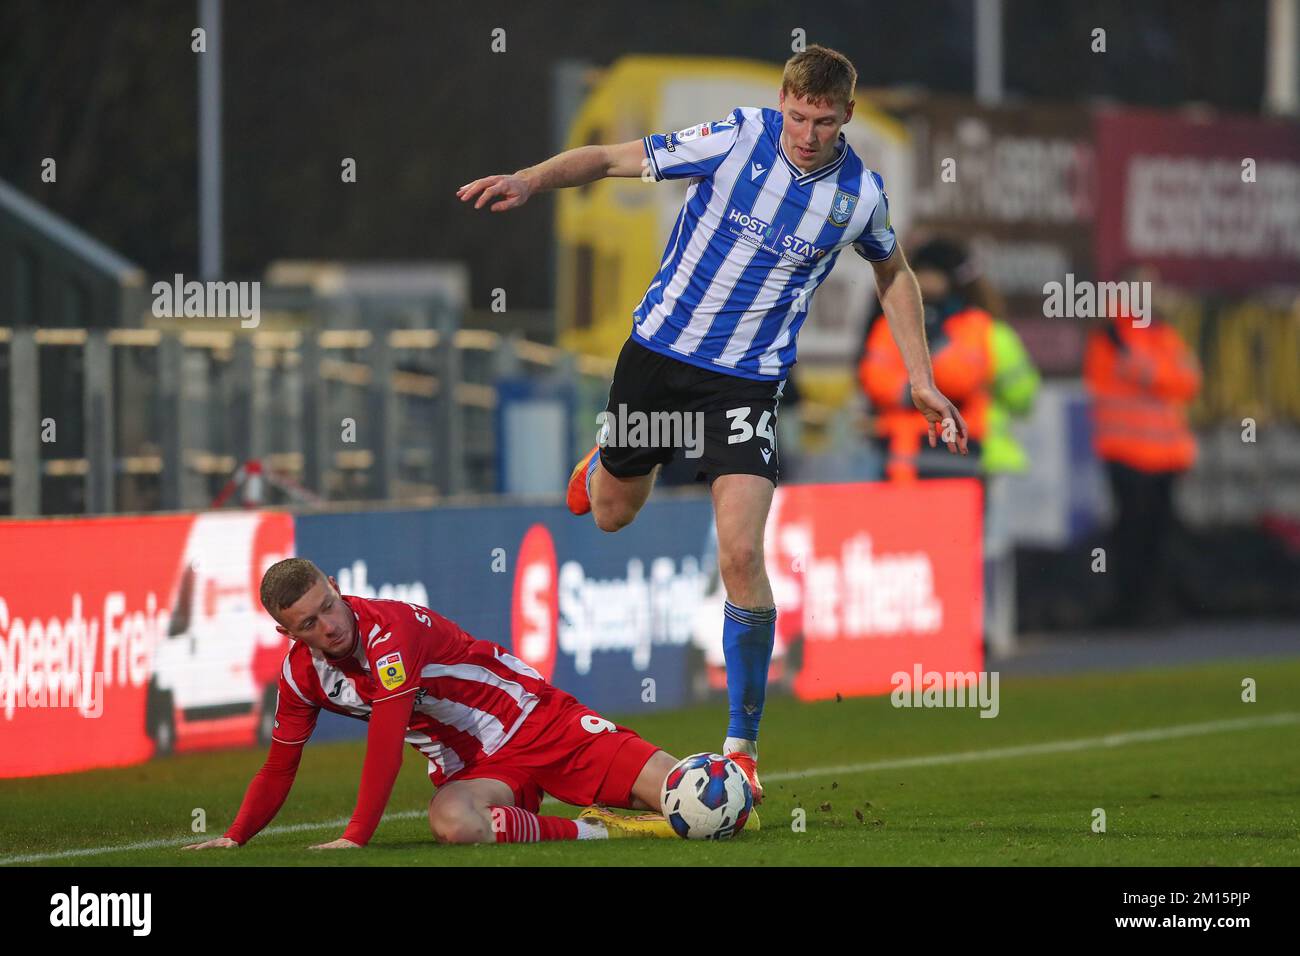 Mark McGuinness #34 of Sheffield Wednesday and Jay Stansfield #9 of Exeter City battle for the ball during the Sky Bet League 1 match Exeter City vs Sheffield Wednesday at St James' Park, Exeter, United Kingdom, 10th December 2022  (Photo by Gareth Evans/News Images) Stock Photo